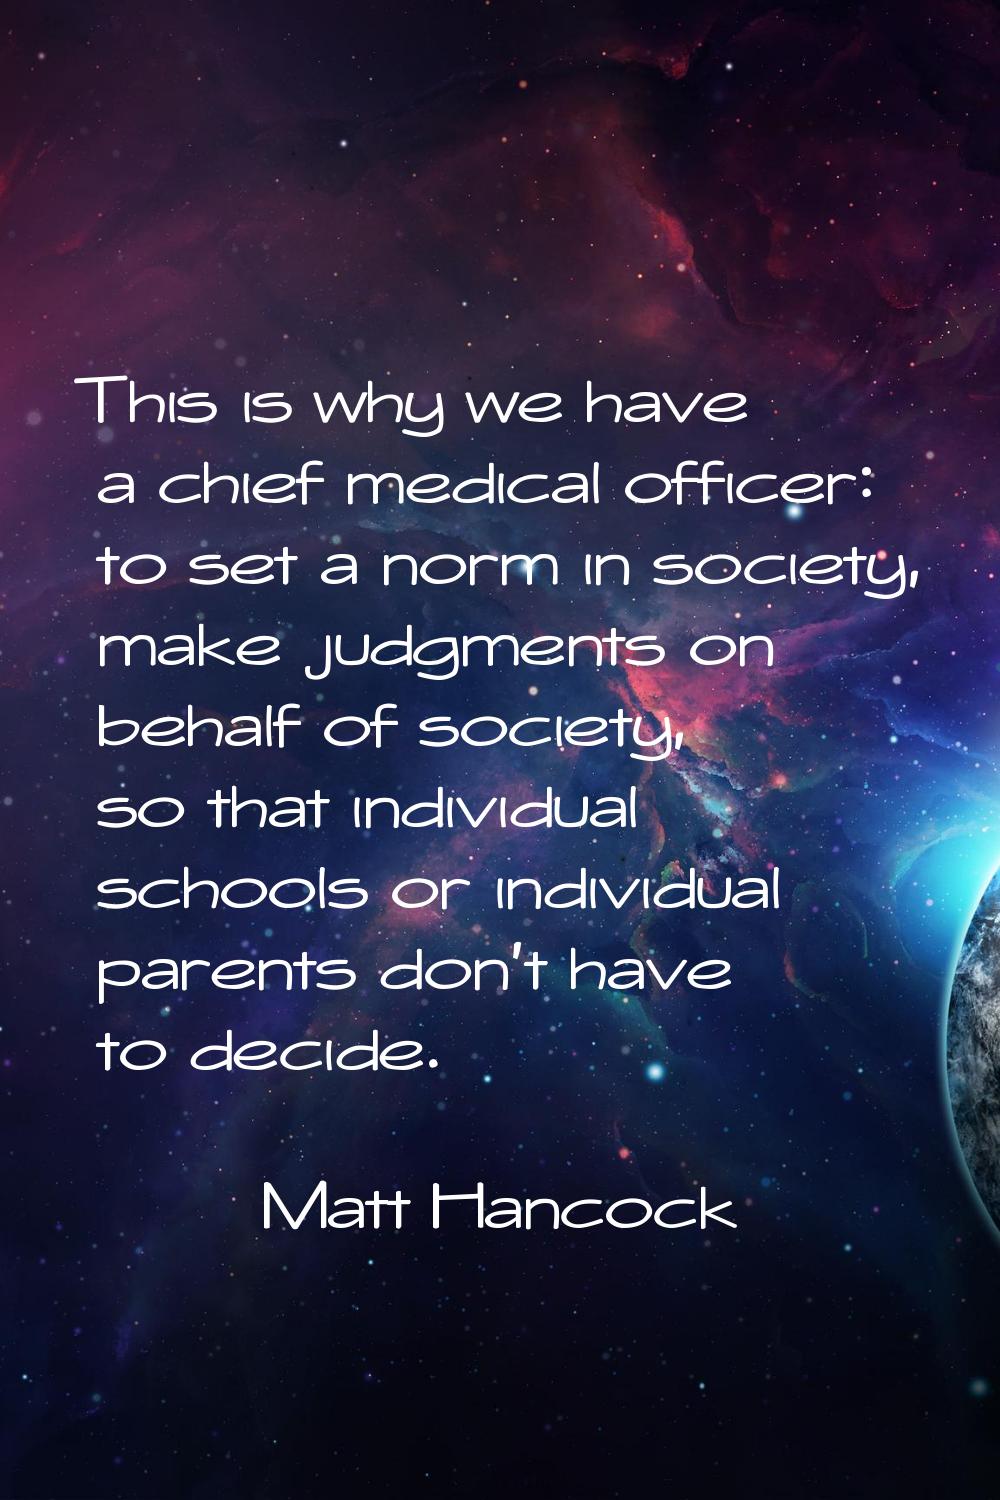 This is why we have a chief medical officer: to set a norm in society, make judgments on behalf of 